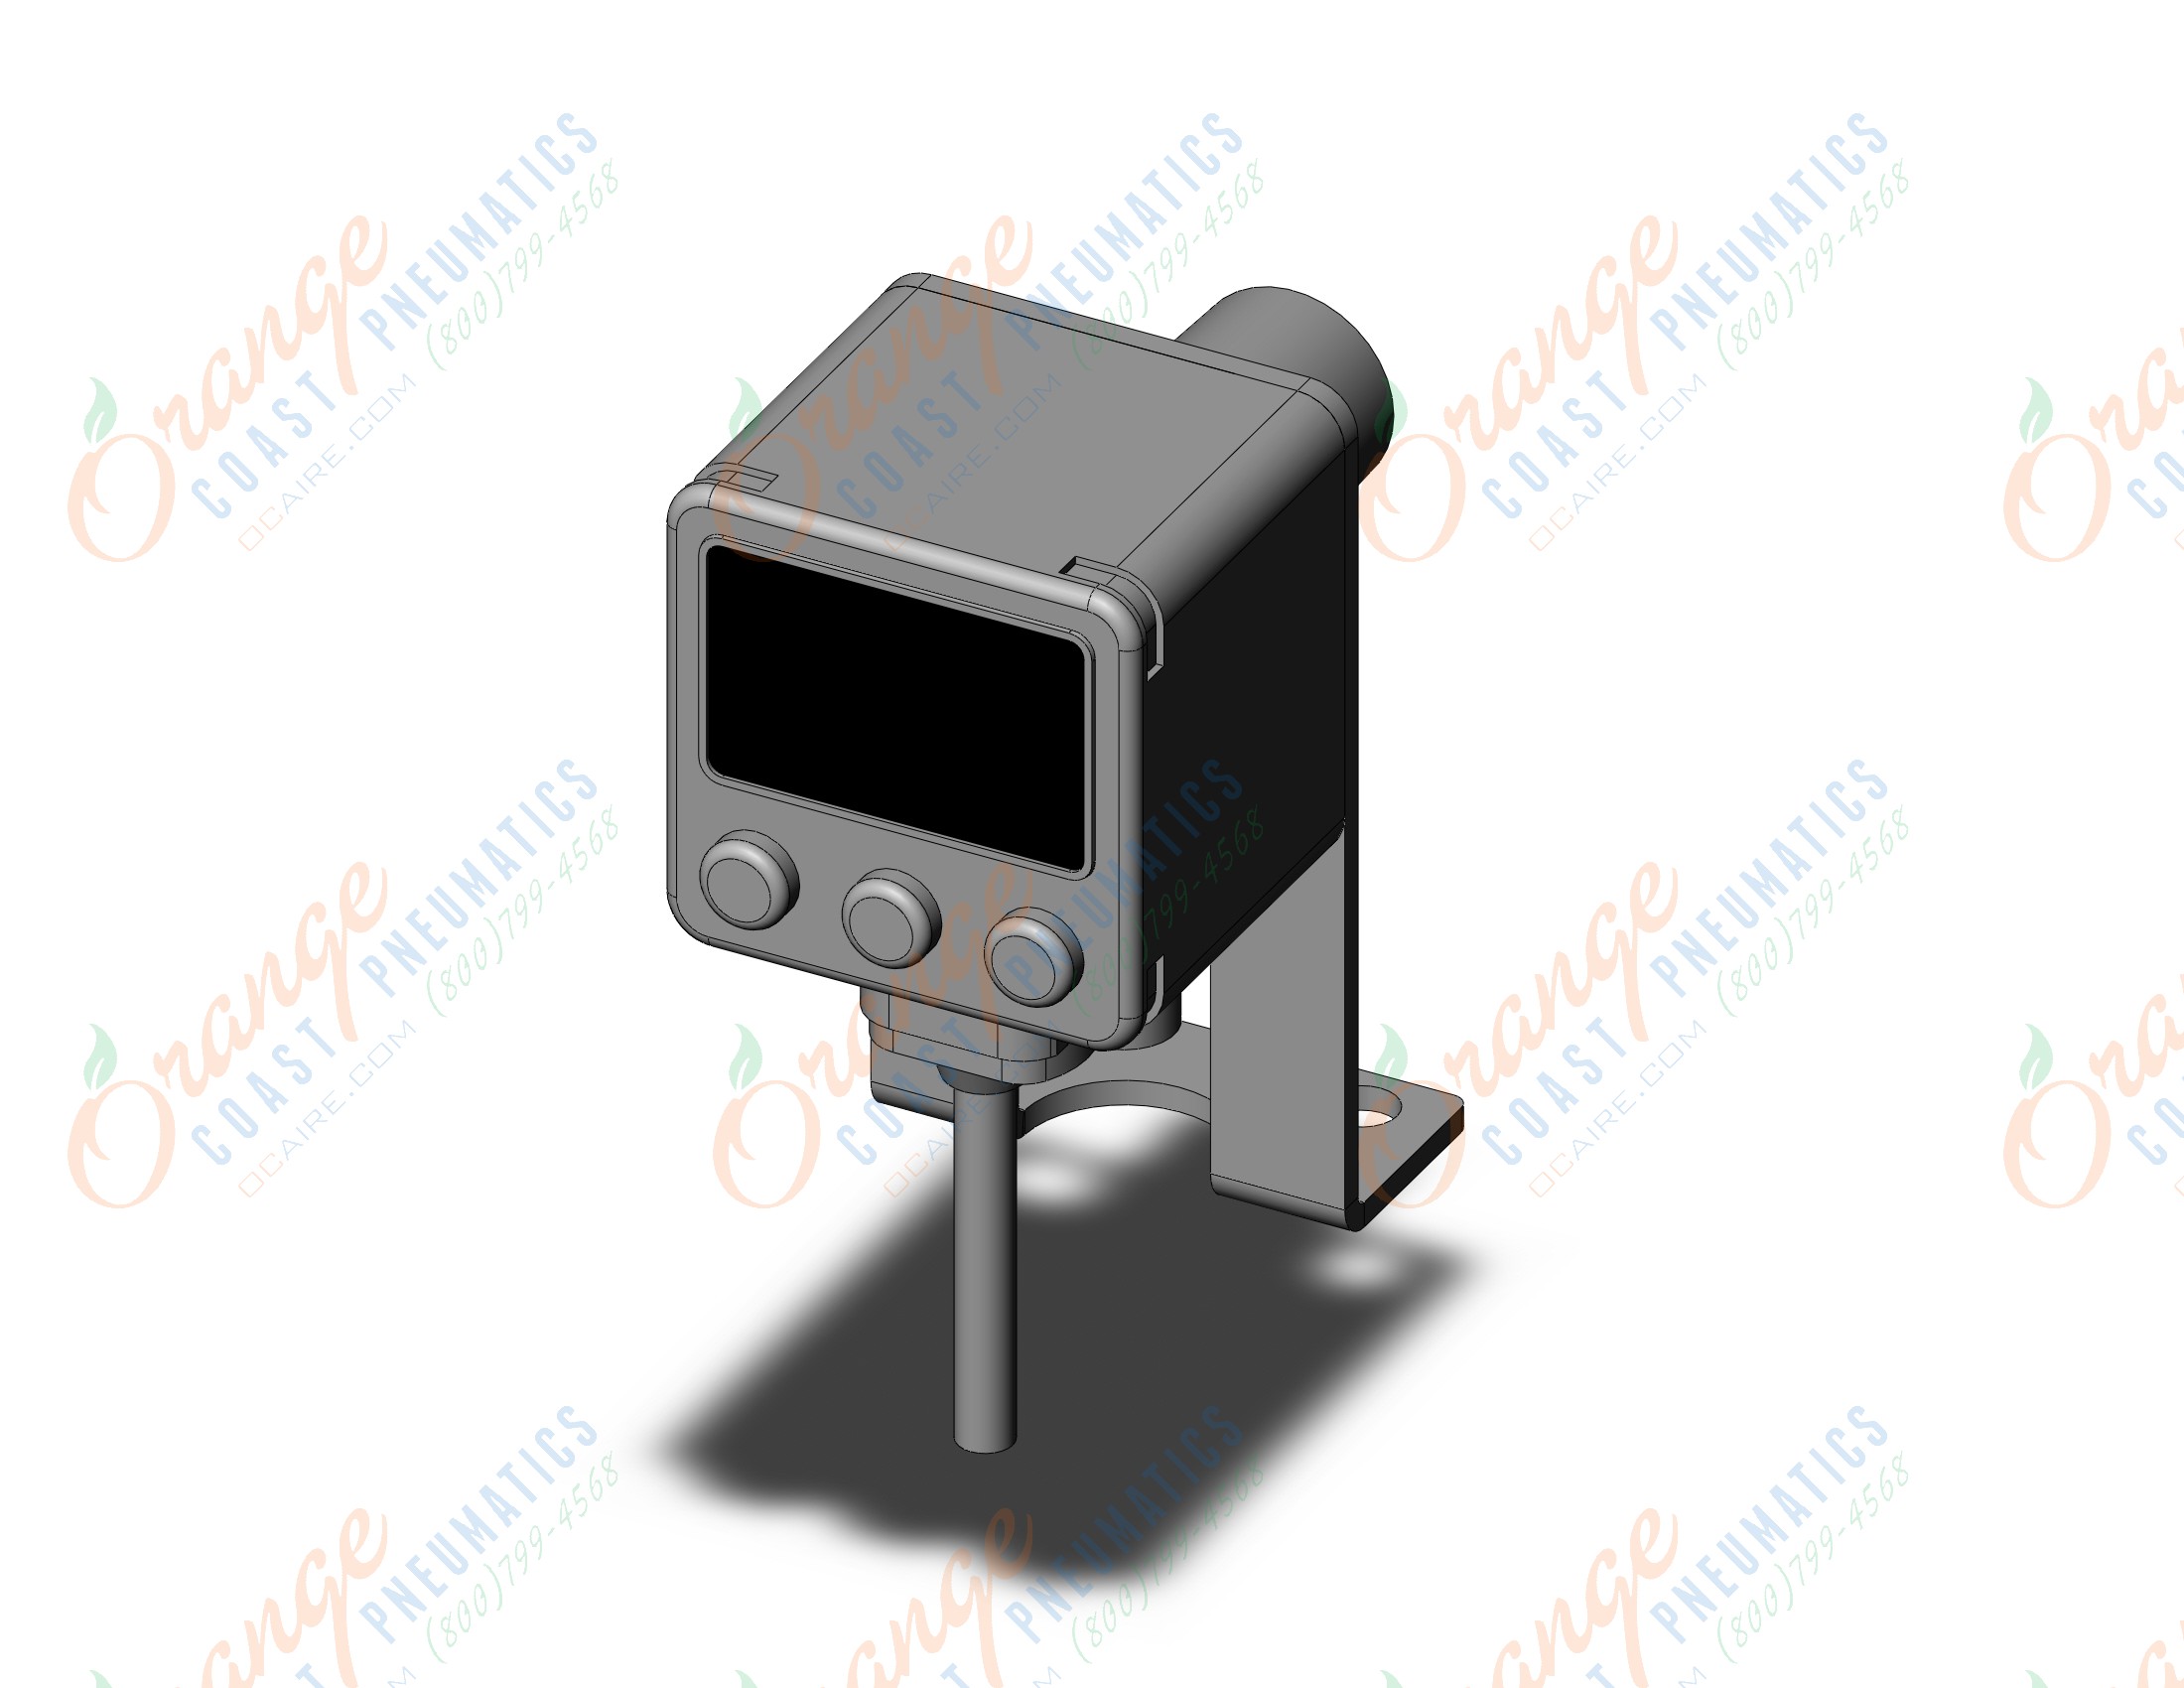 SMC ISE80H-N02-V-A-X501 2-color digital press switch for fluids, PRESSURE SWITCH, ISE50-80